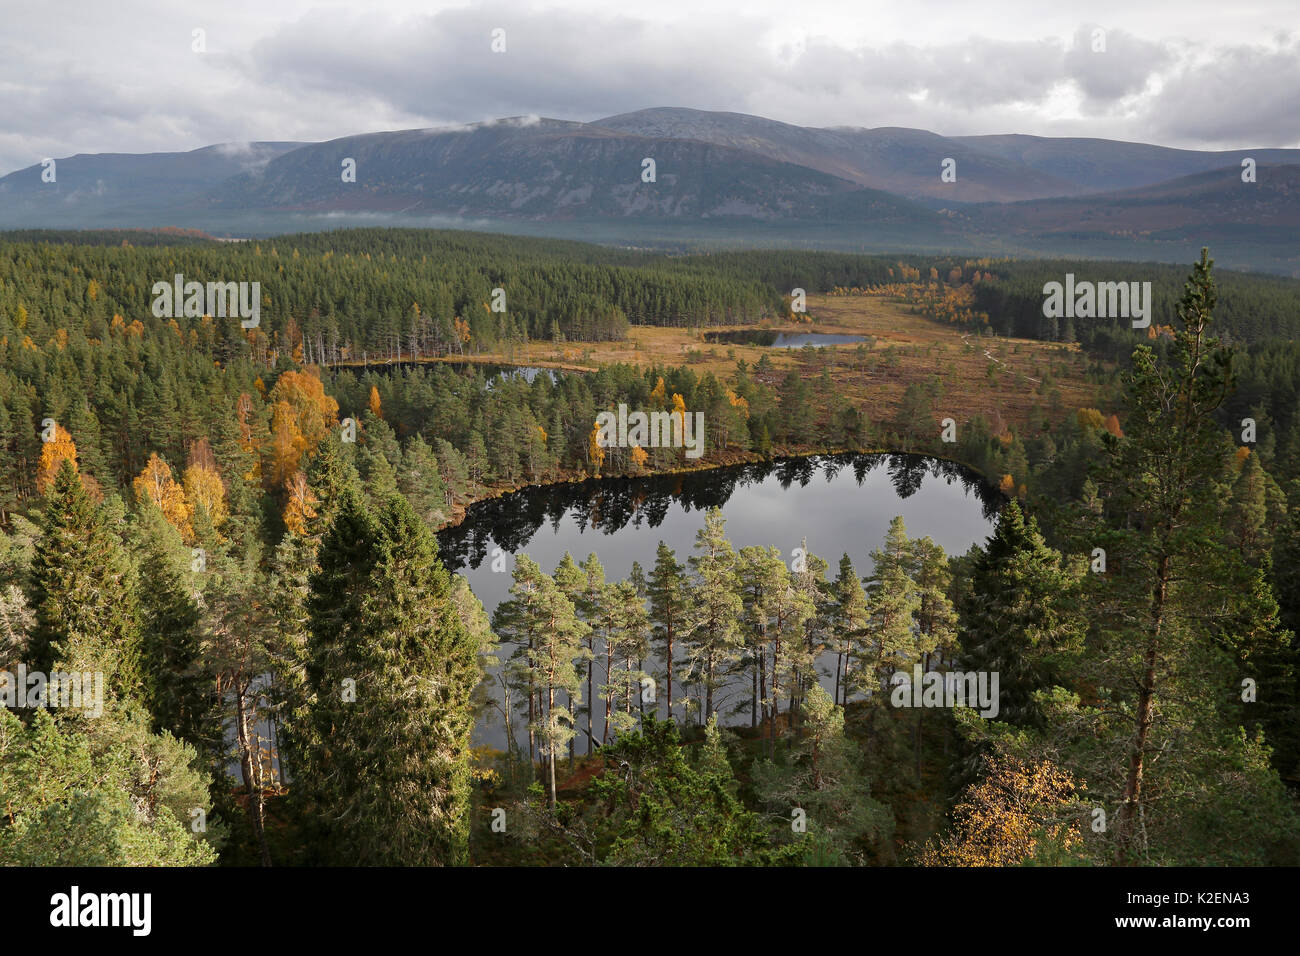 View over Uath Lochans surrounded by pine forest looking towards the Cairngorm mountains, Highlands,  Scotland, UK, October. Stock Photo